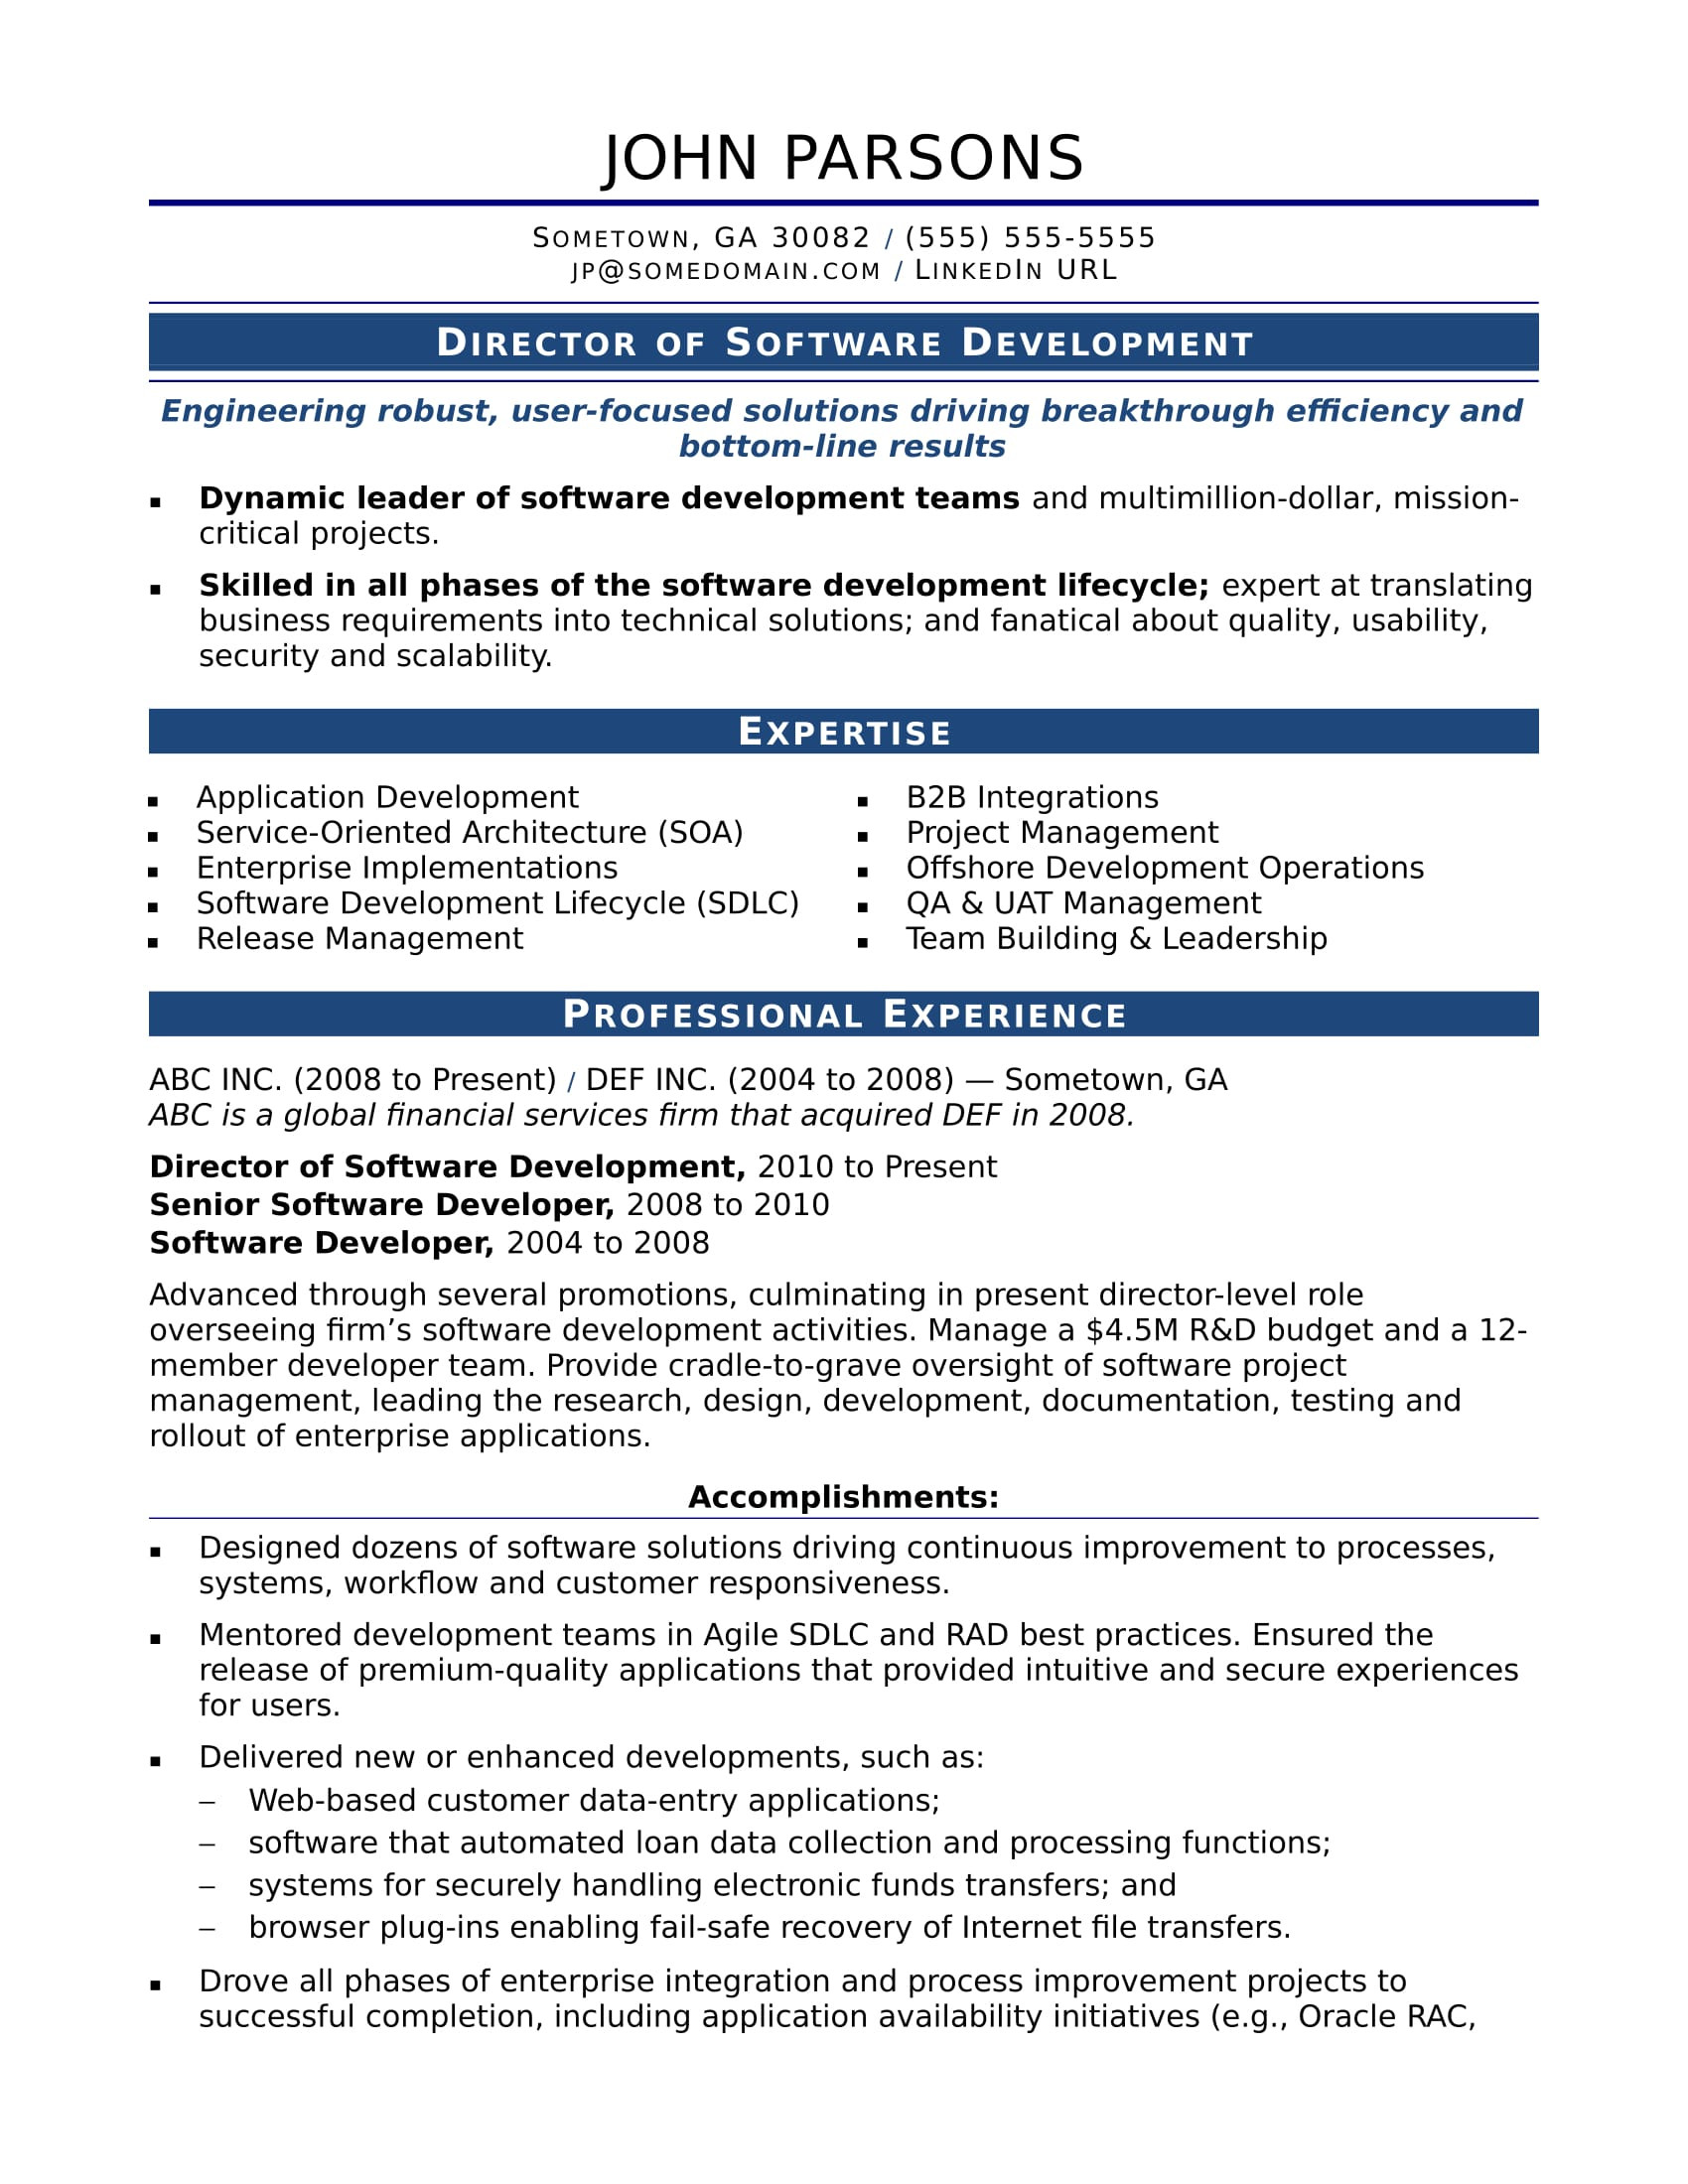 1 Year Experience software Engineer Resume Sample Sample Resume for An Experienced It Developer Monster.com